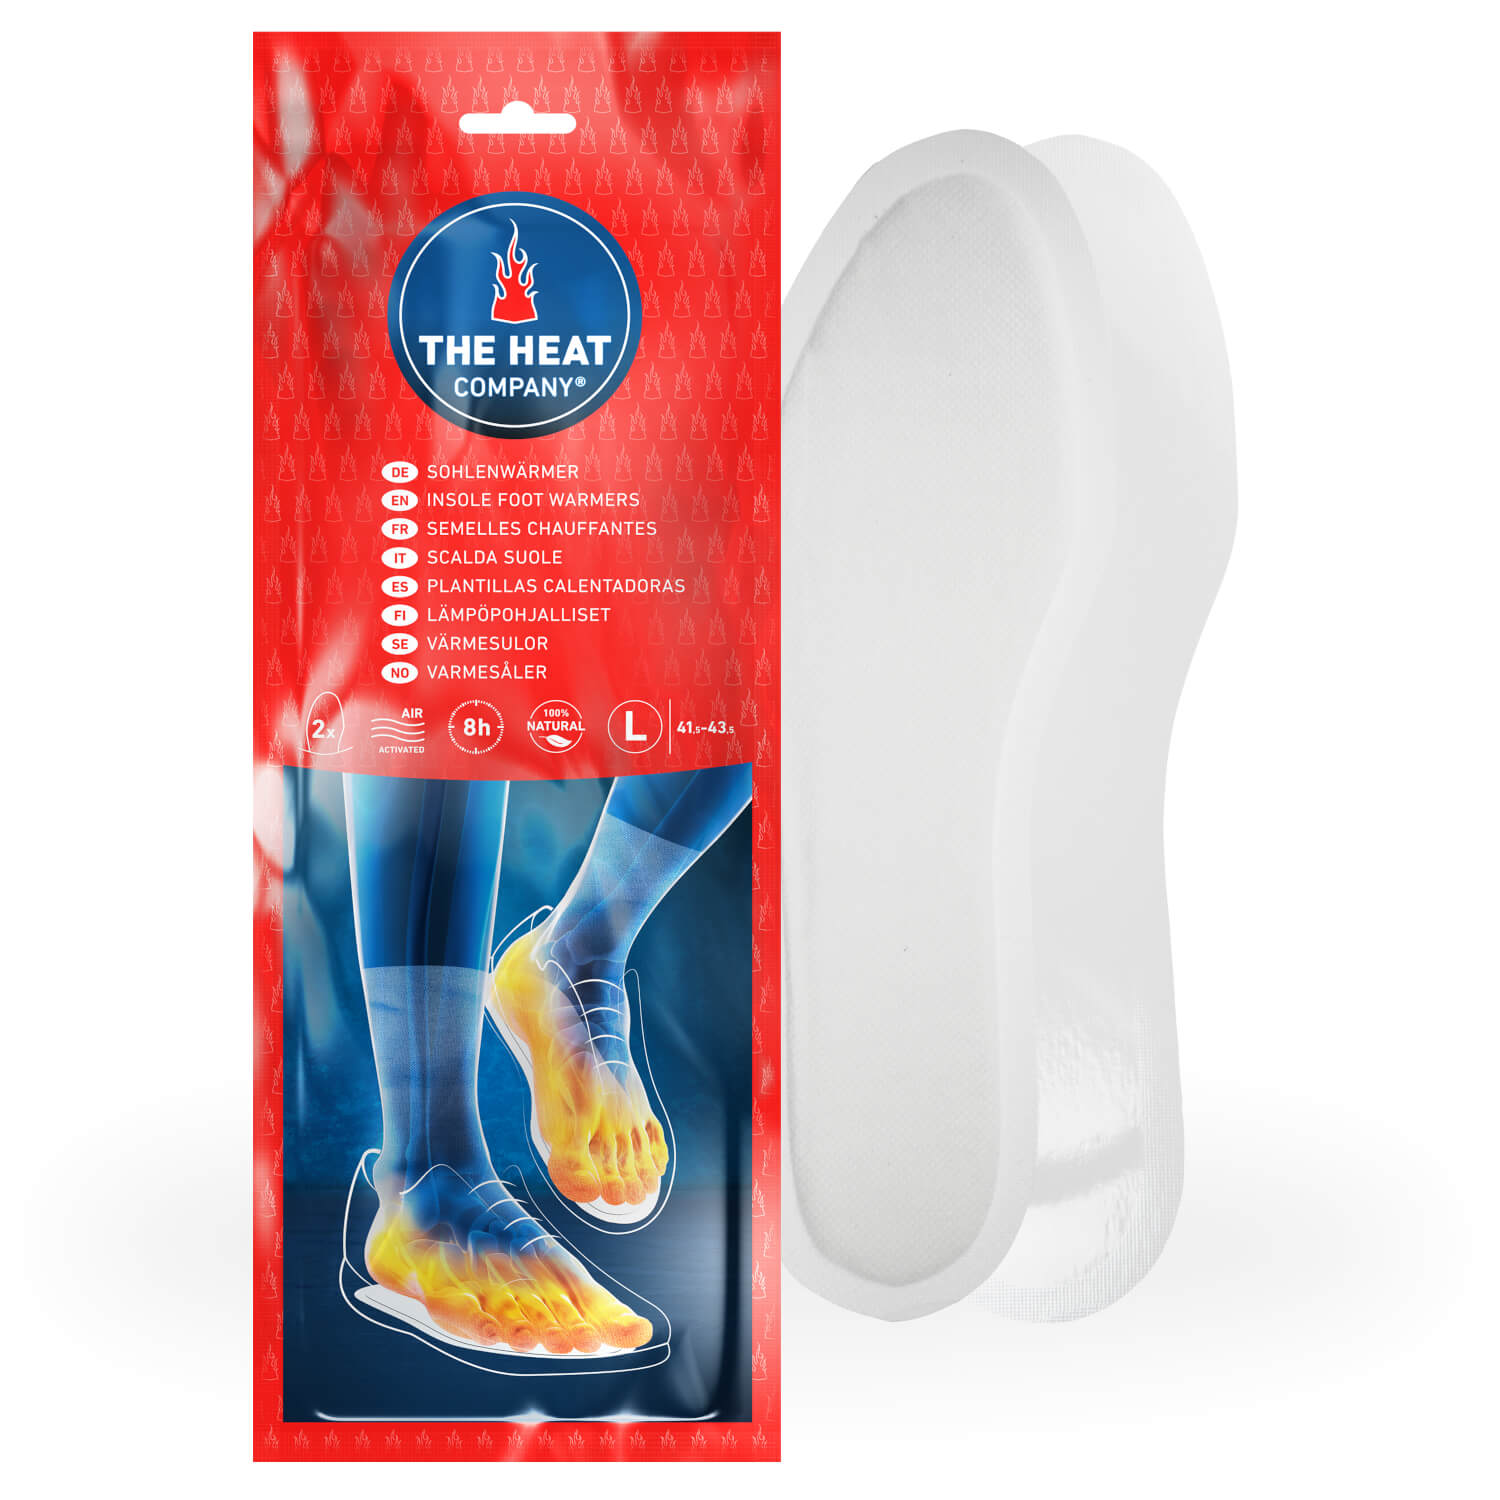 EXTRA WARM THE HEAT COMPANY Insole Foot Warmers Adhesive SMALL Size: 3-6.5-5 or 30 Pairs Instant Heat Purely Natural 8 Hours of Warmth Air Activated Adhesive Foot Warmers 